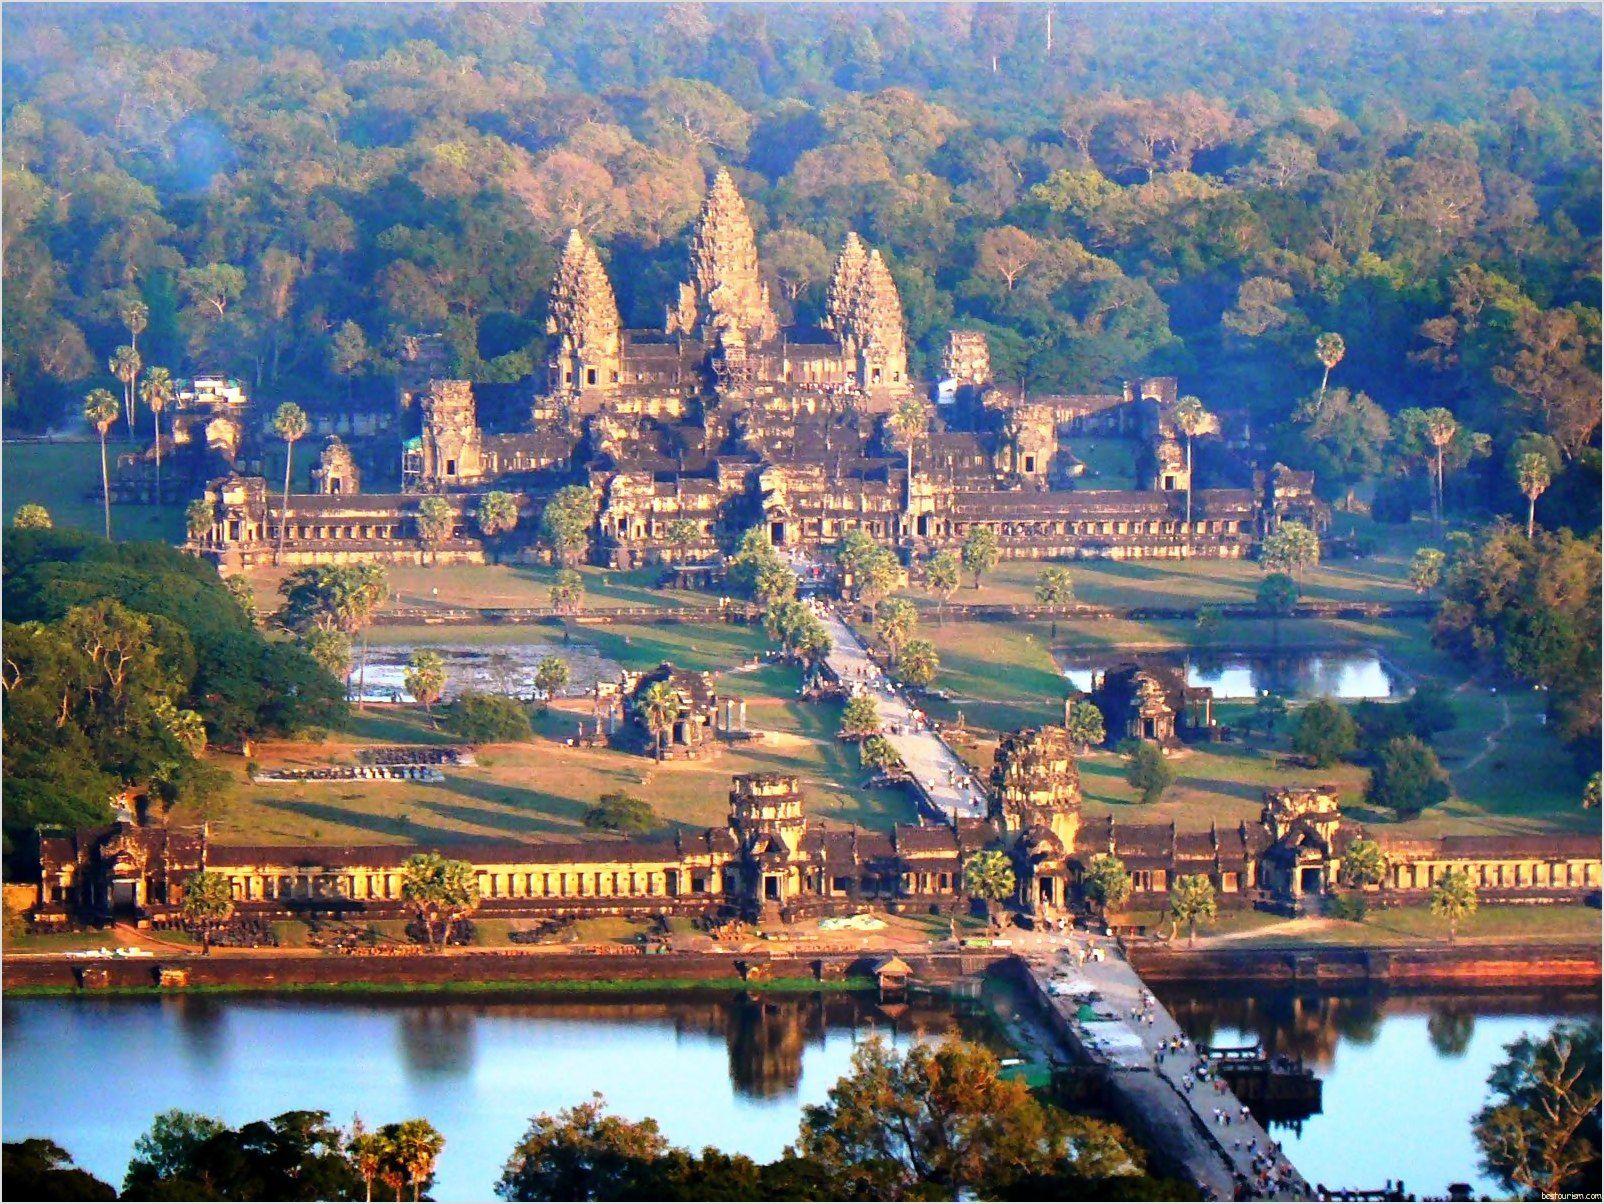 Angkor Wat in Cambodia tourism destinations